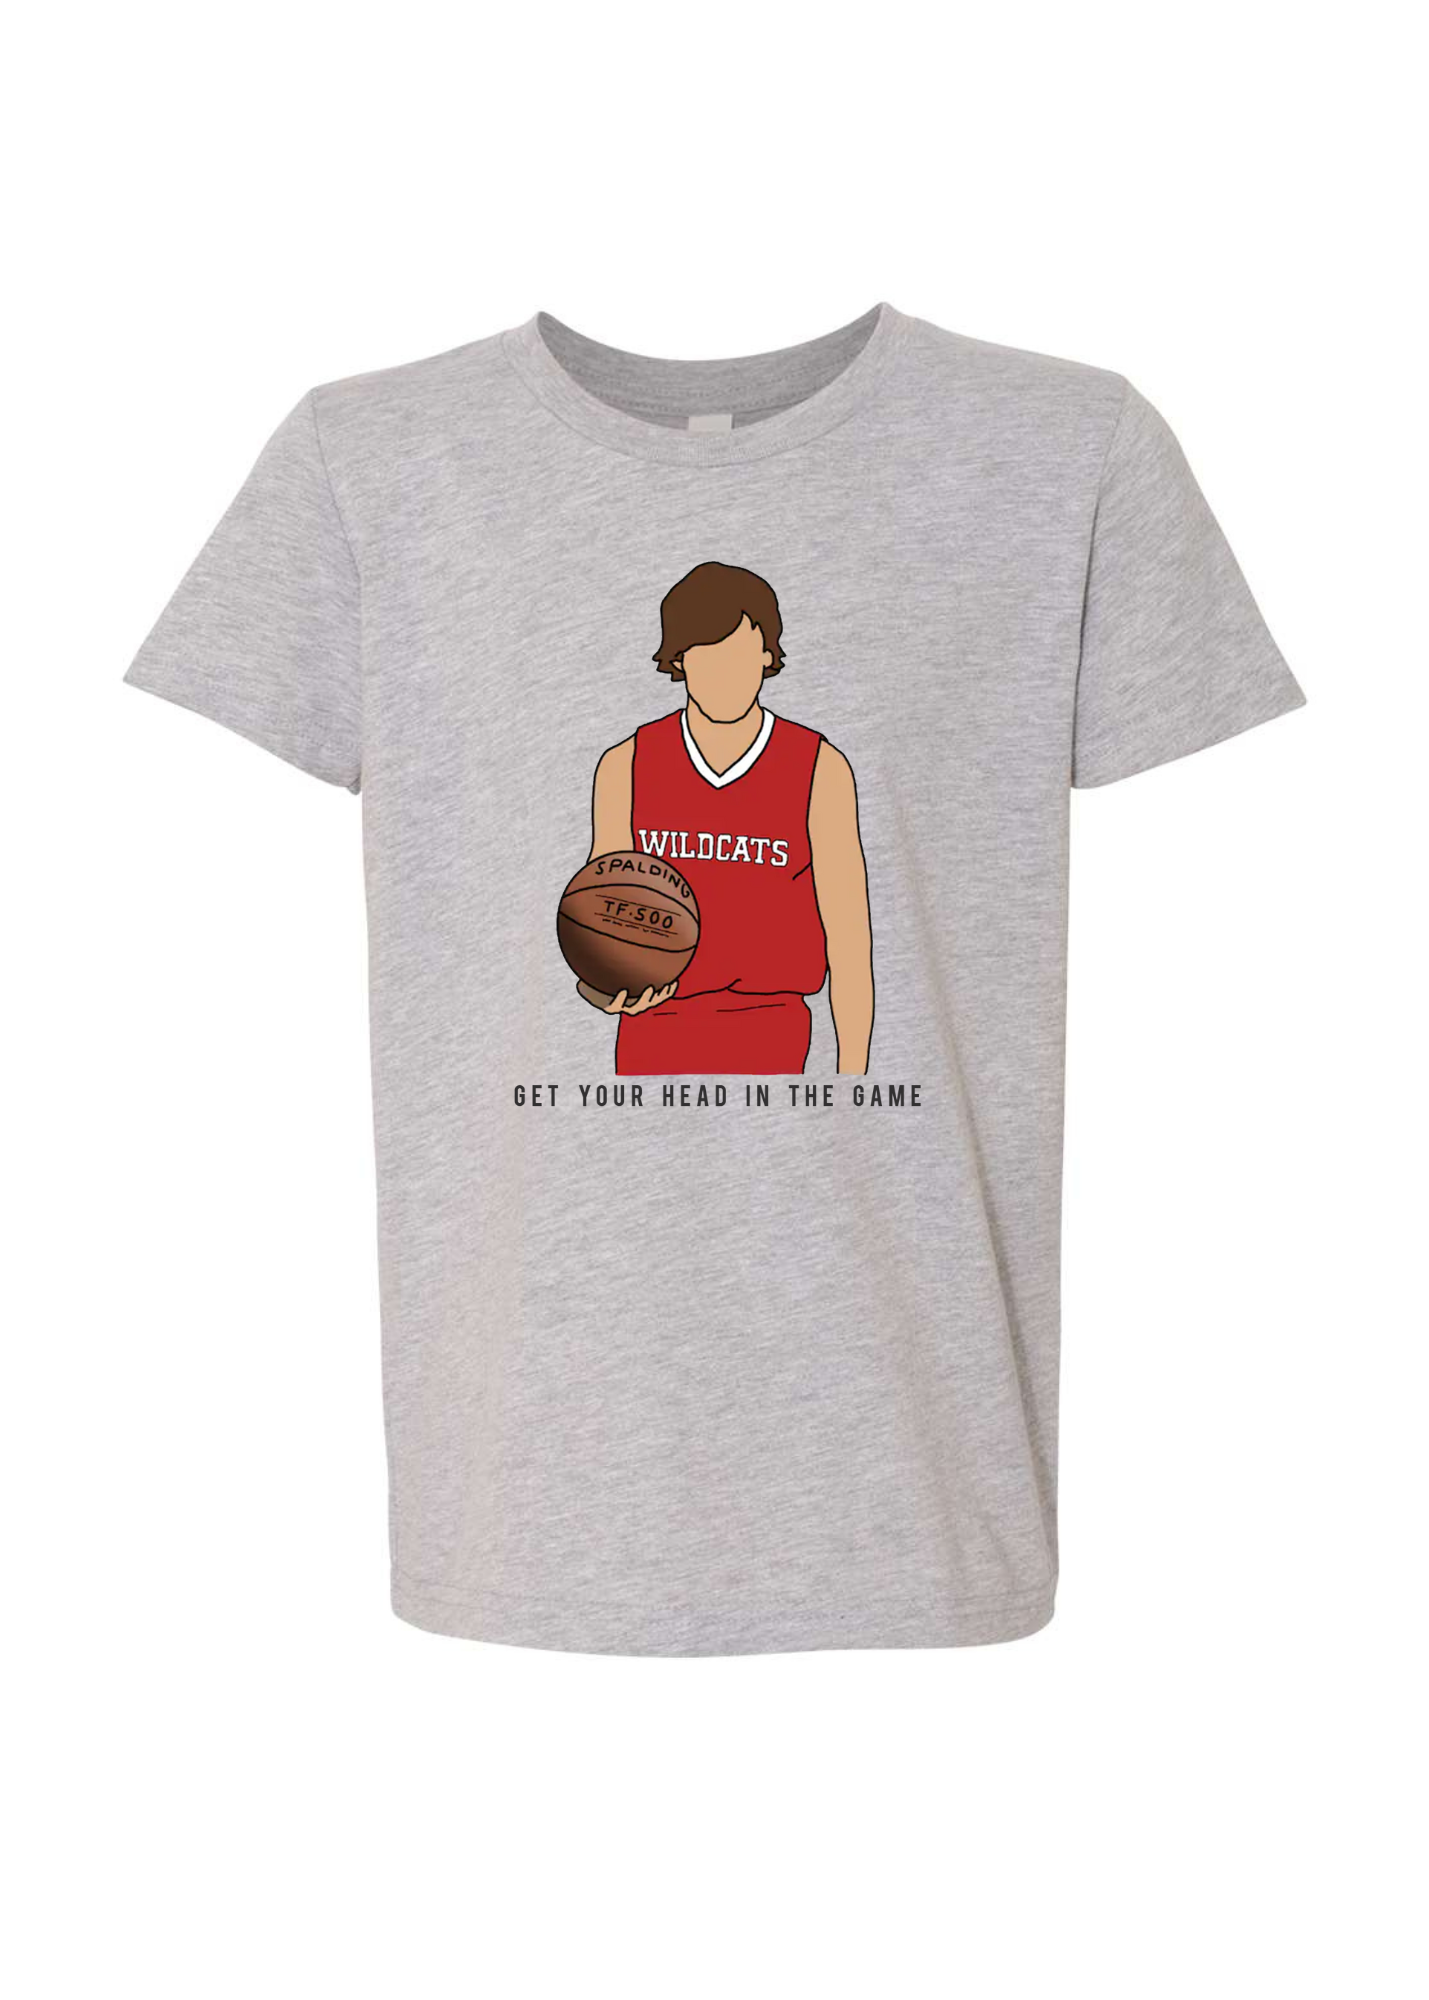 Get Your Head in the Game | Kids Tee-Kids Tees-Sister Shirts-Sister Shirts, Cute & Custom Tees for Mama & Littles in Trussville, Alabama.